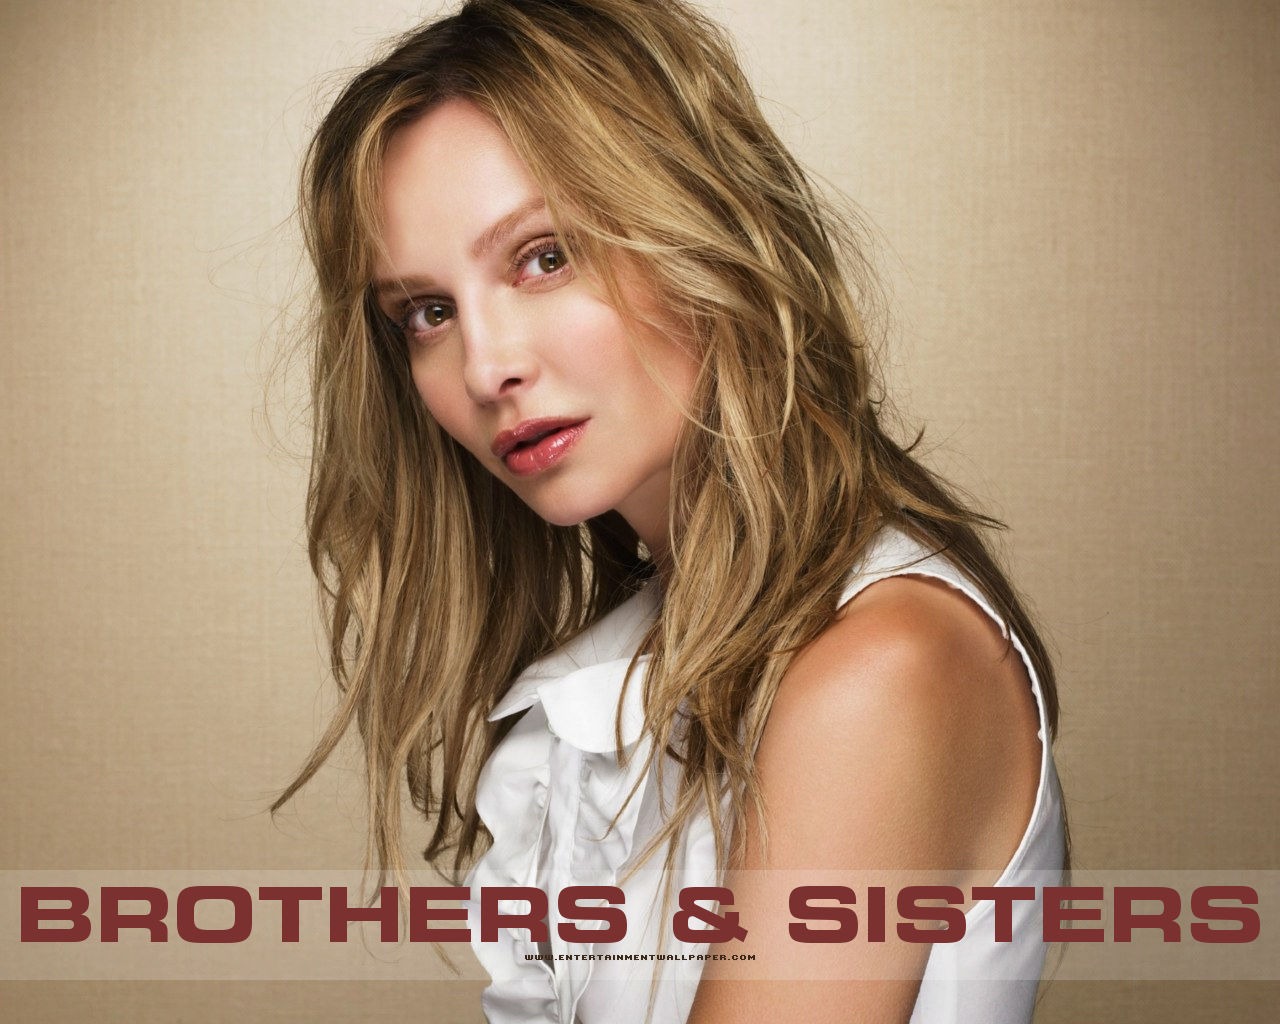 Brothers & Sisters wallpaper #24 - 1280x1024